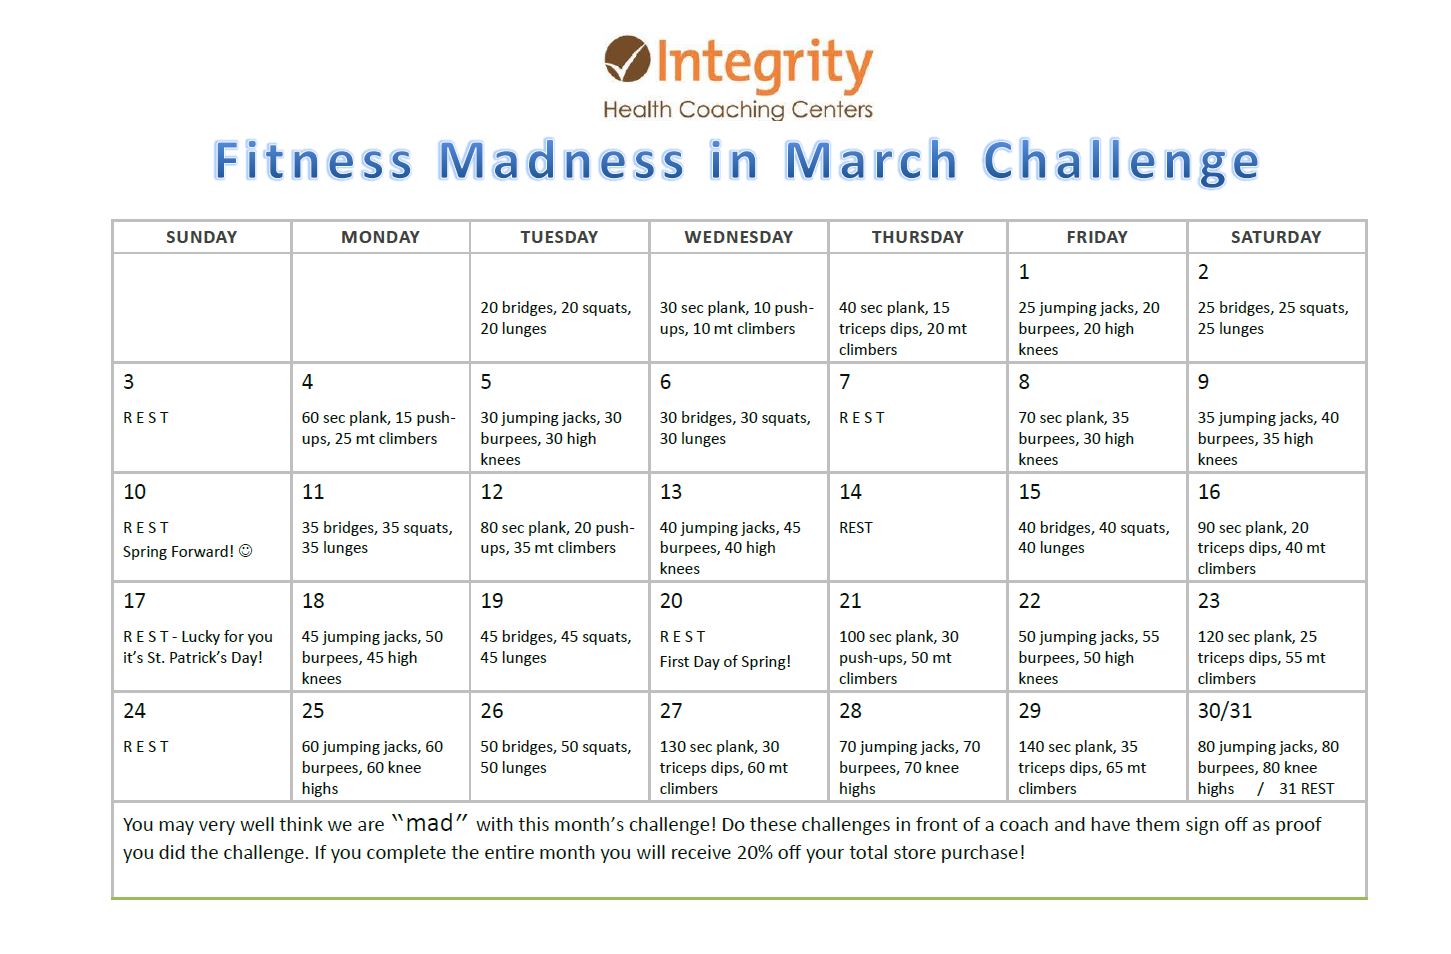 March Madness Fitness Challenge